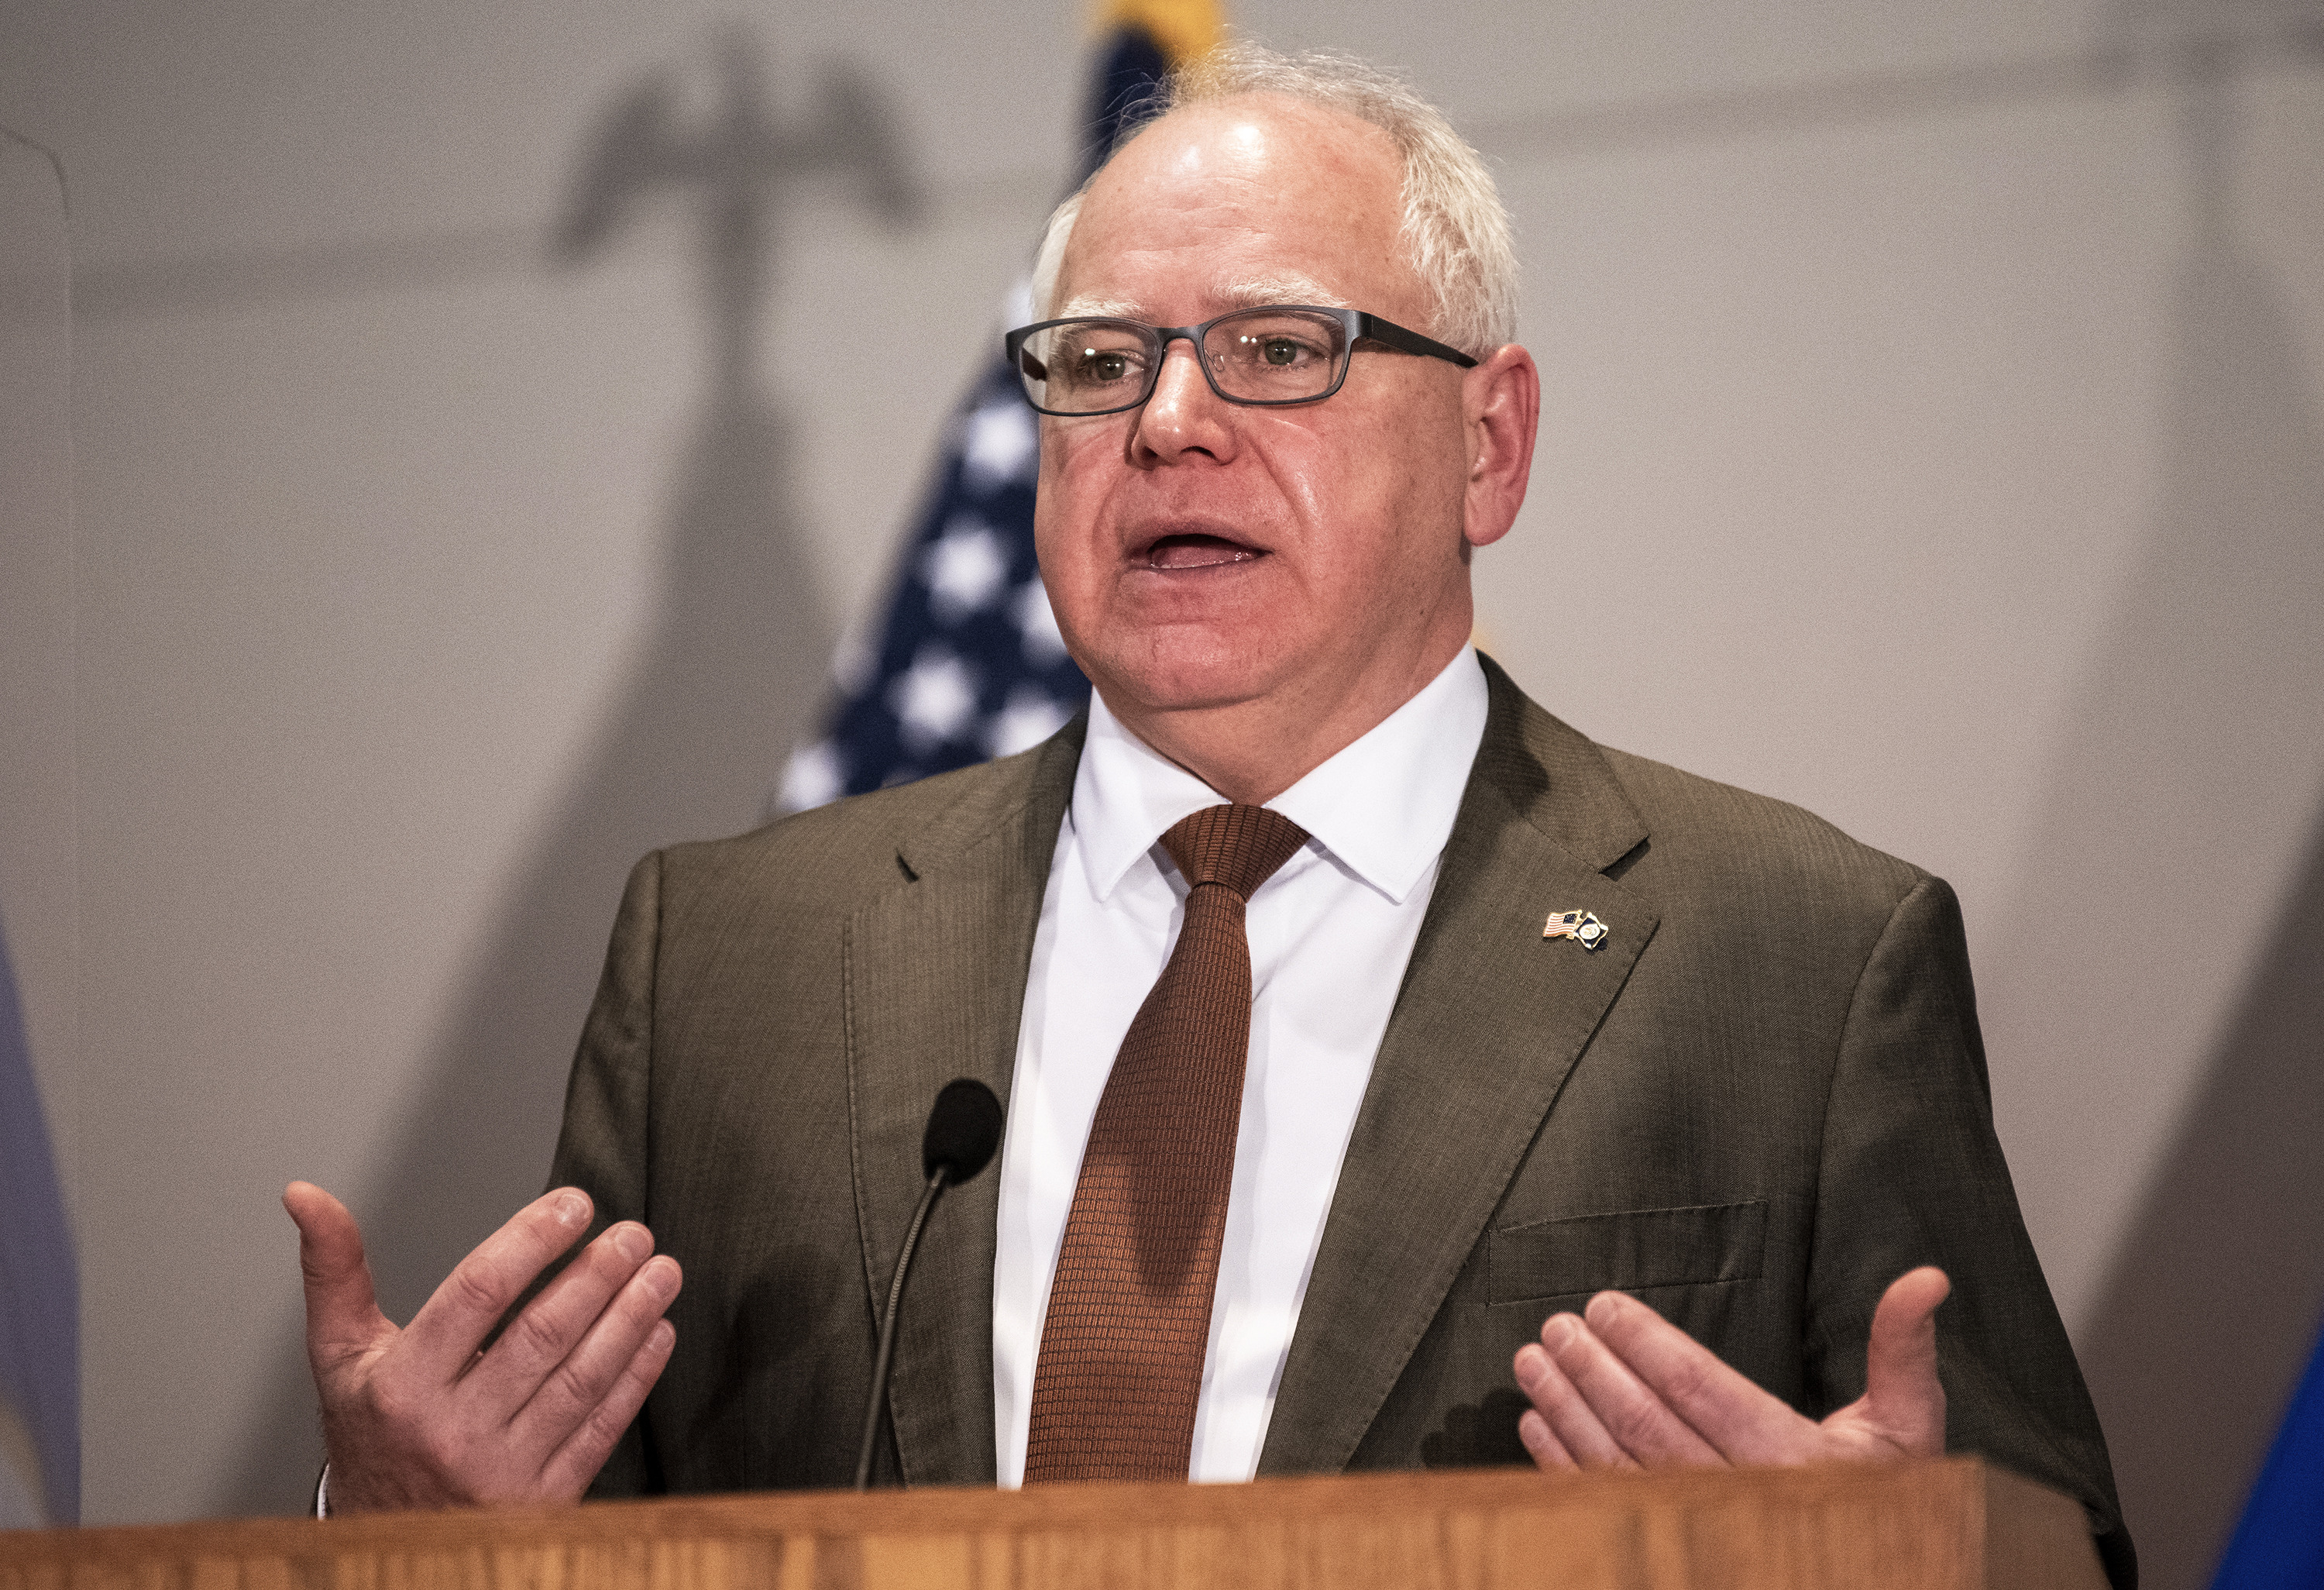 Minnesota Governor Tim Walz speaks during a press conference on April 19, 2021 in St. Paul, Minnesota.